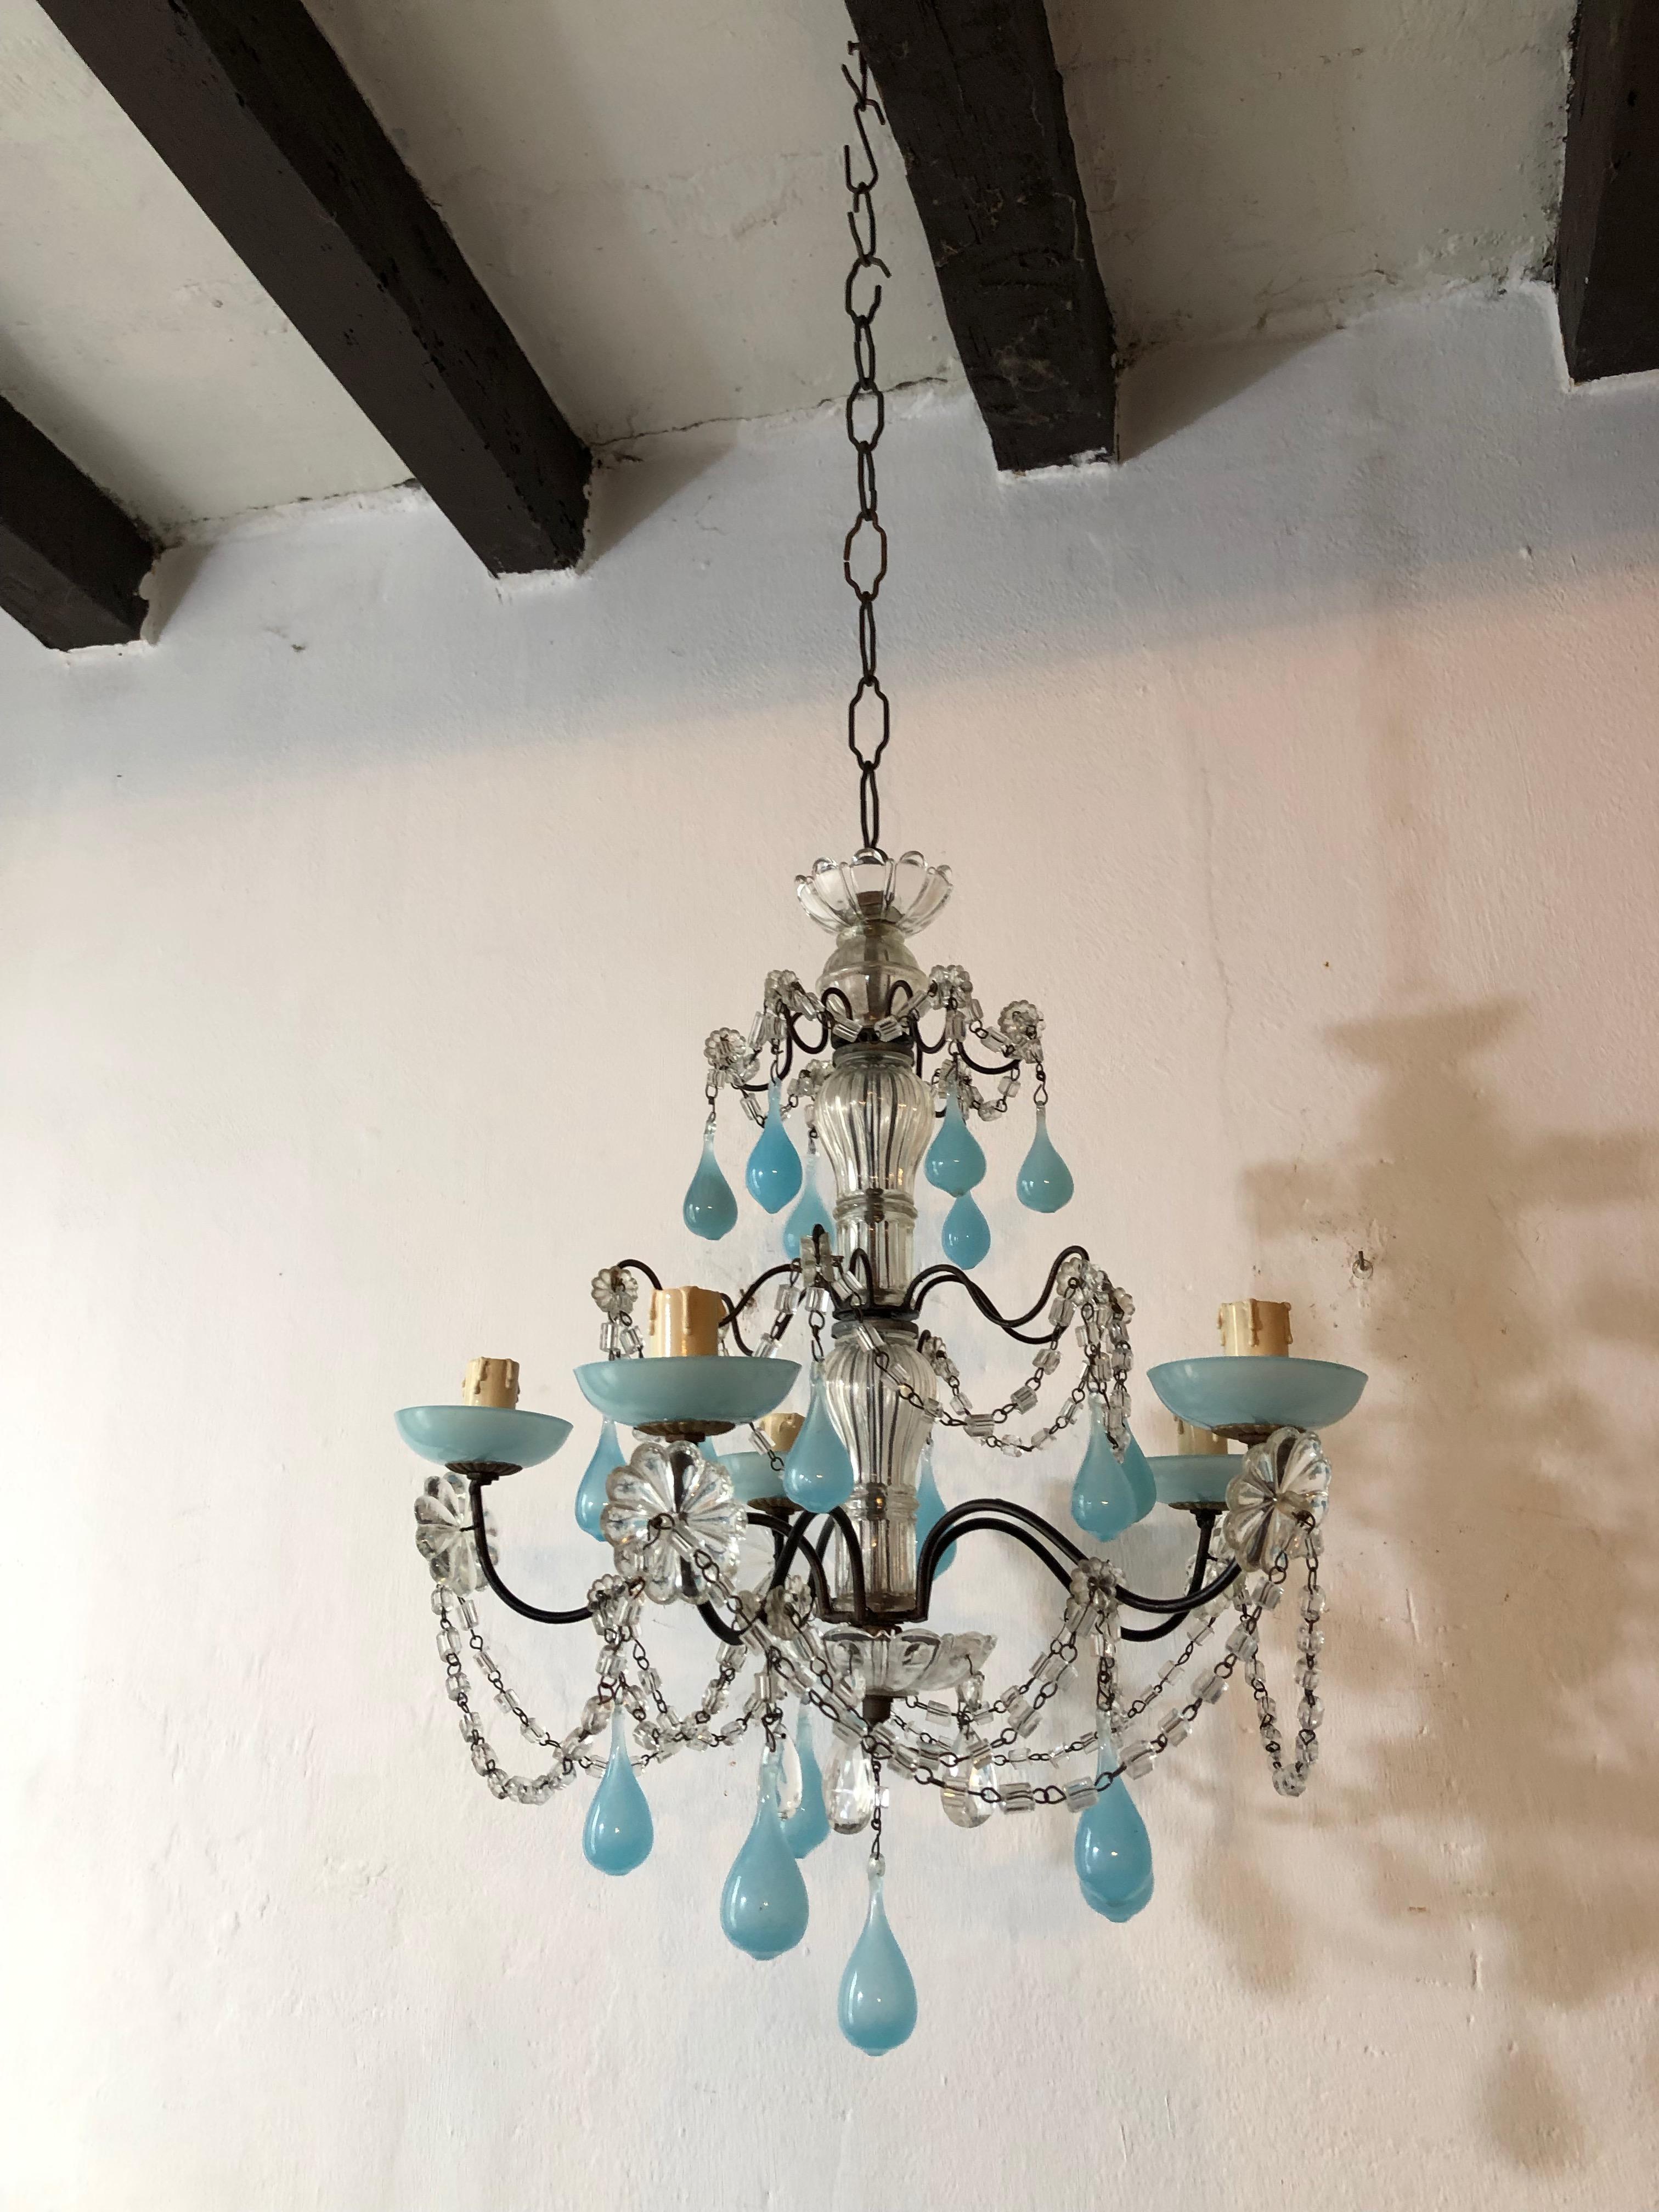 Housing five lights sitting in blue opaline bobeches. Rewired and ready to hang. Two clear crystal bobeches as well. Adorning swags of macaroni beads, florets and rare fat blue opaline Murano glass drops. Free priority shipping from Italy. Adding